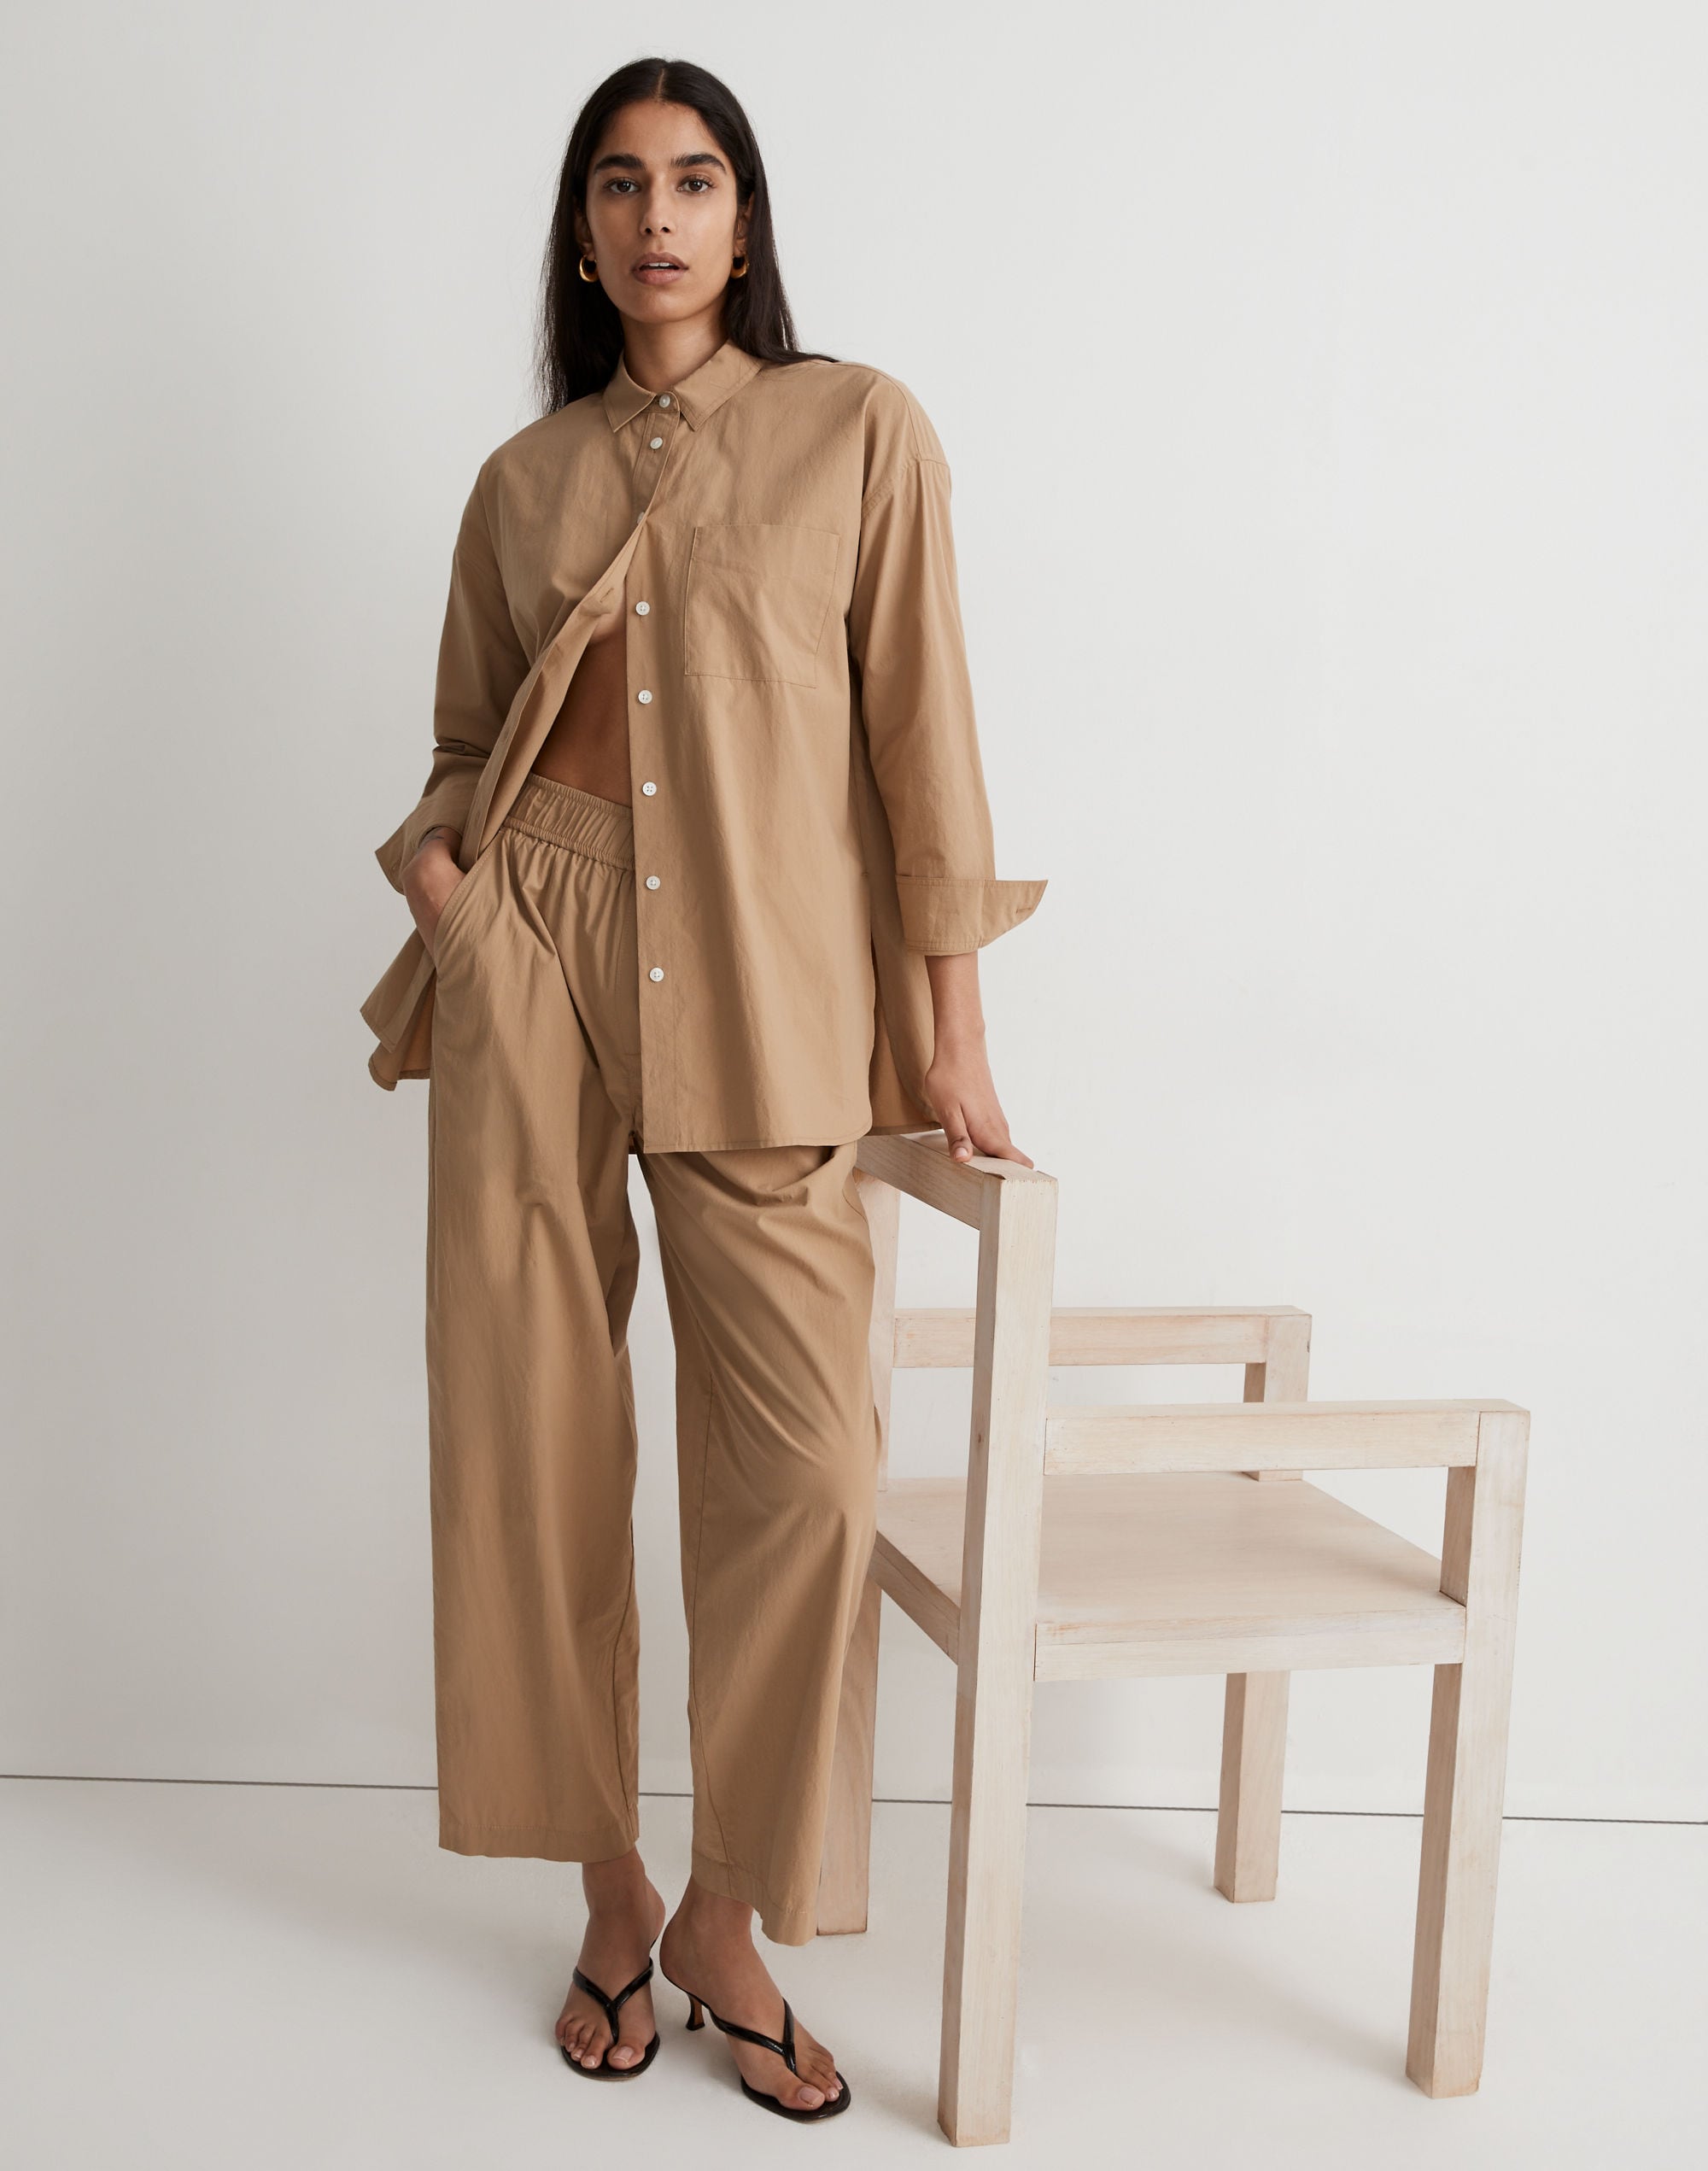 The Effortless Tailored Wide Leg Pants, Women's Casual Wide Leg High Waisted  Straight Long Trousers Pants (Color : Beige, Size : 3X-Large) : :  Clothing, Shoes & Accessories